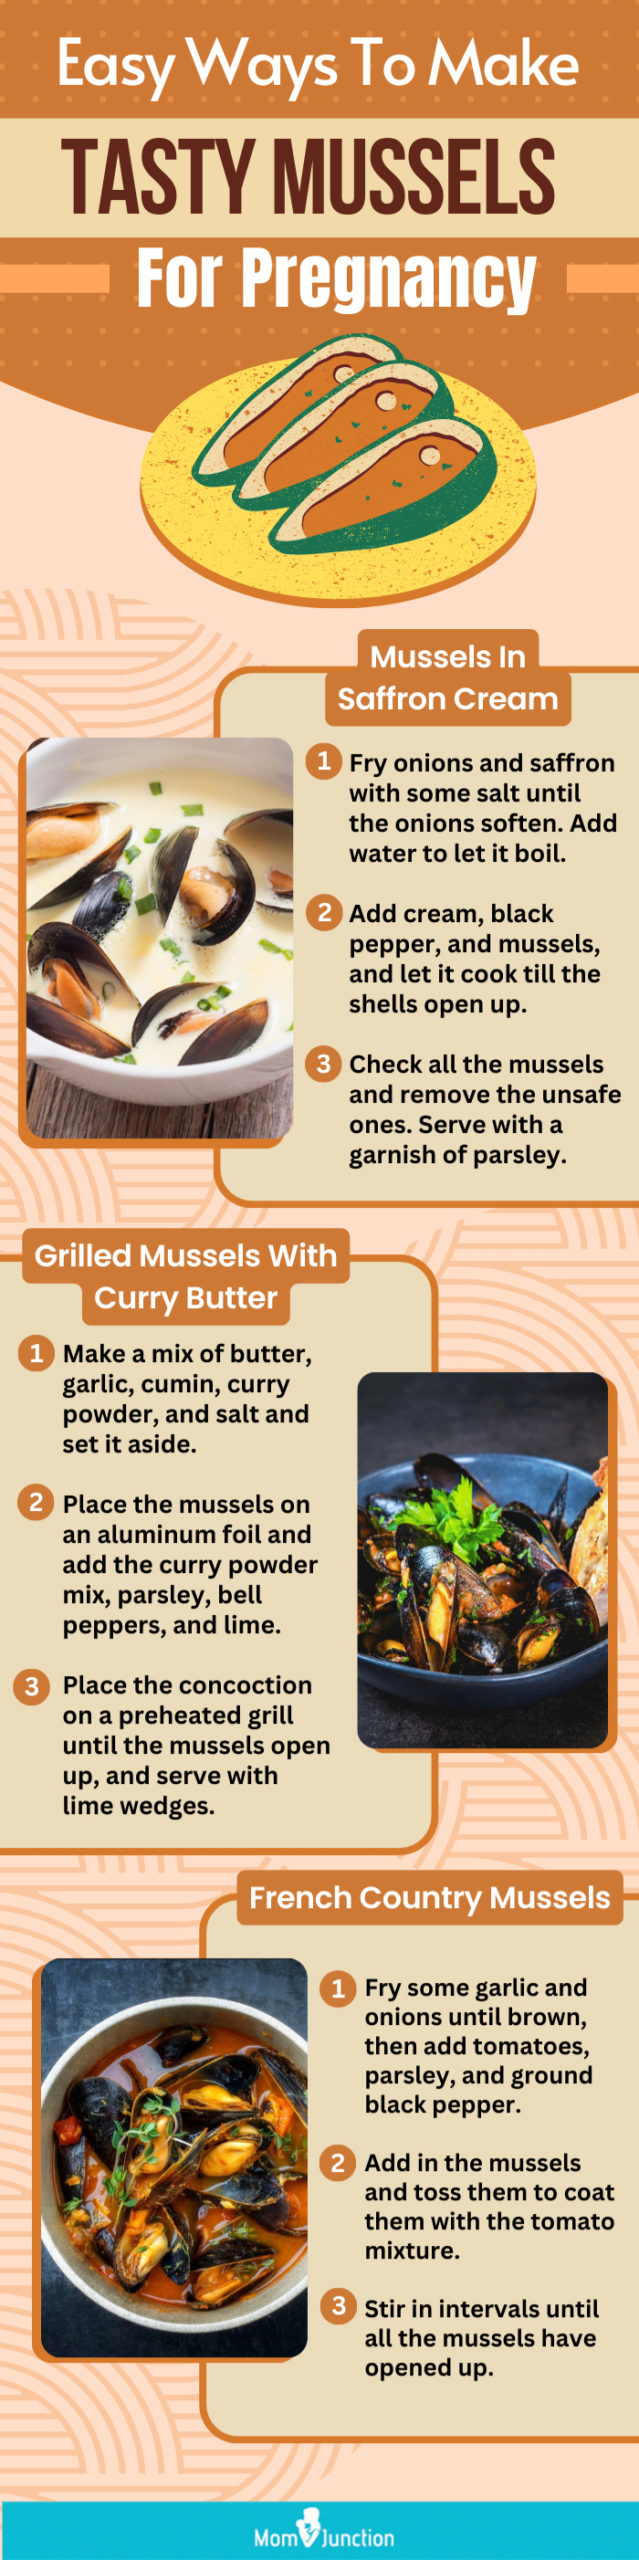 mussel recipes for pregnant women (infographic)